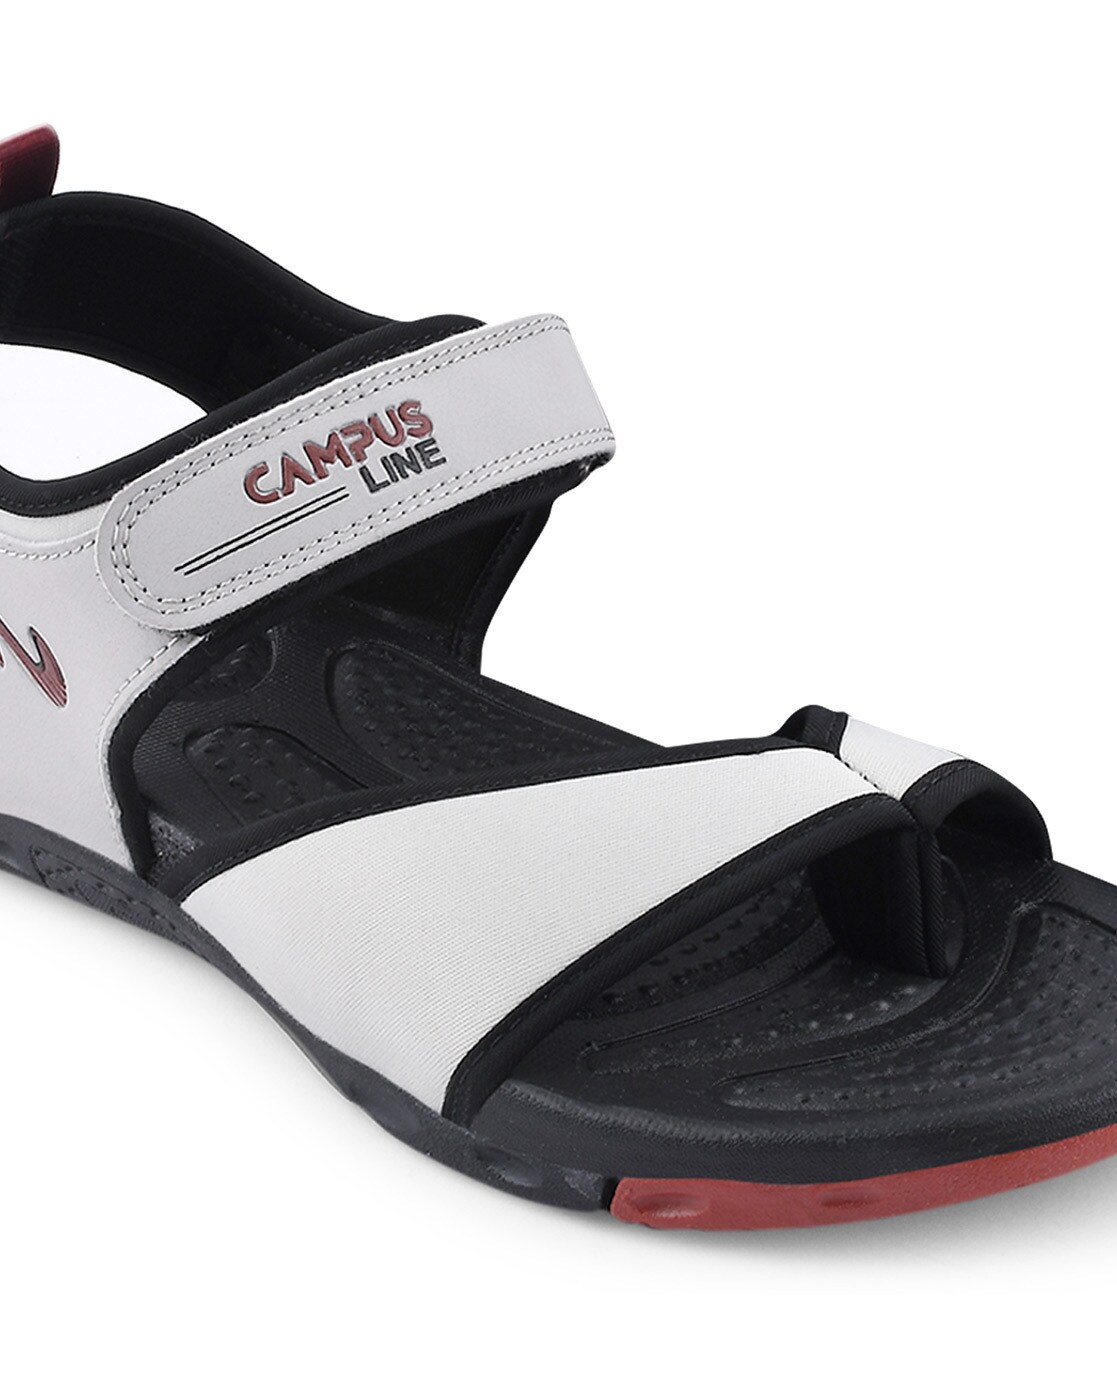 Buy Campus Navy Floater Sandals for Men at Best Price @ Tata CLiQ